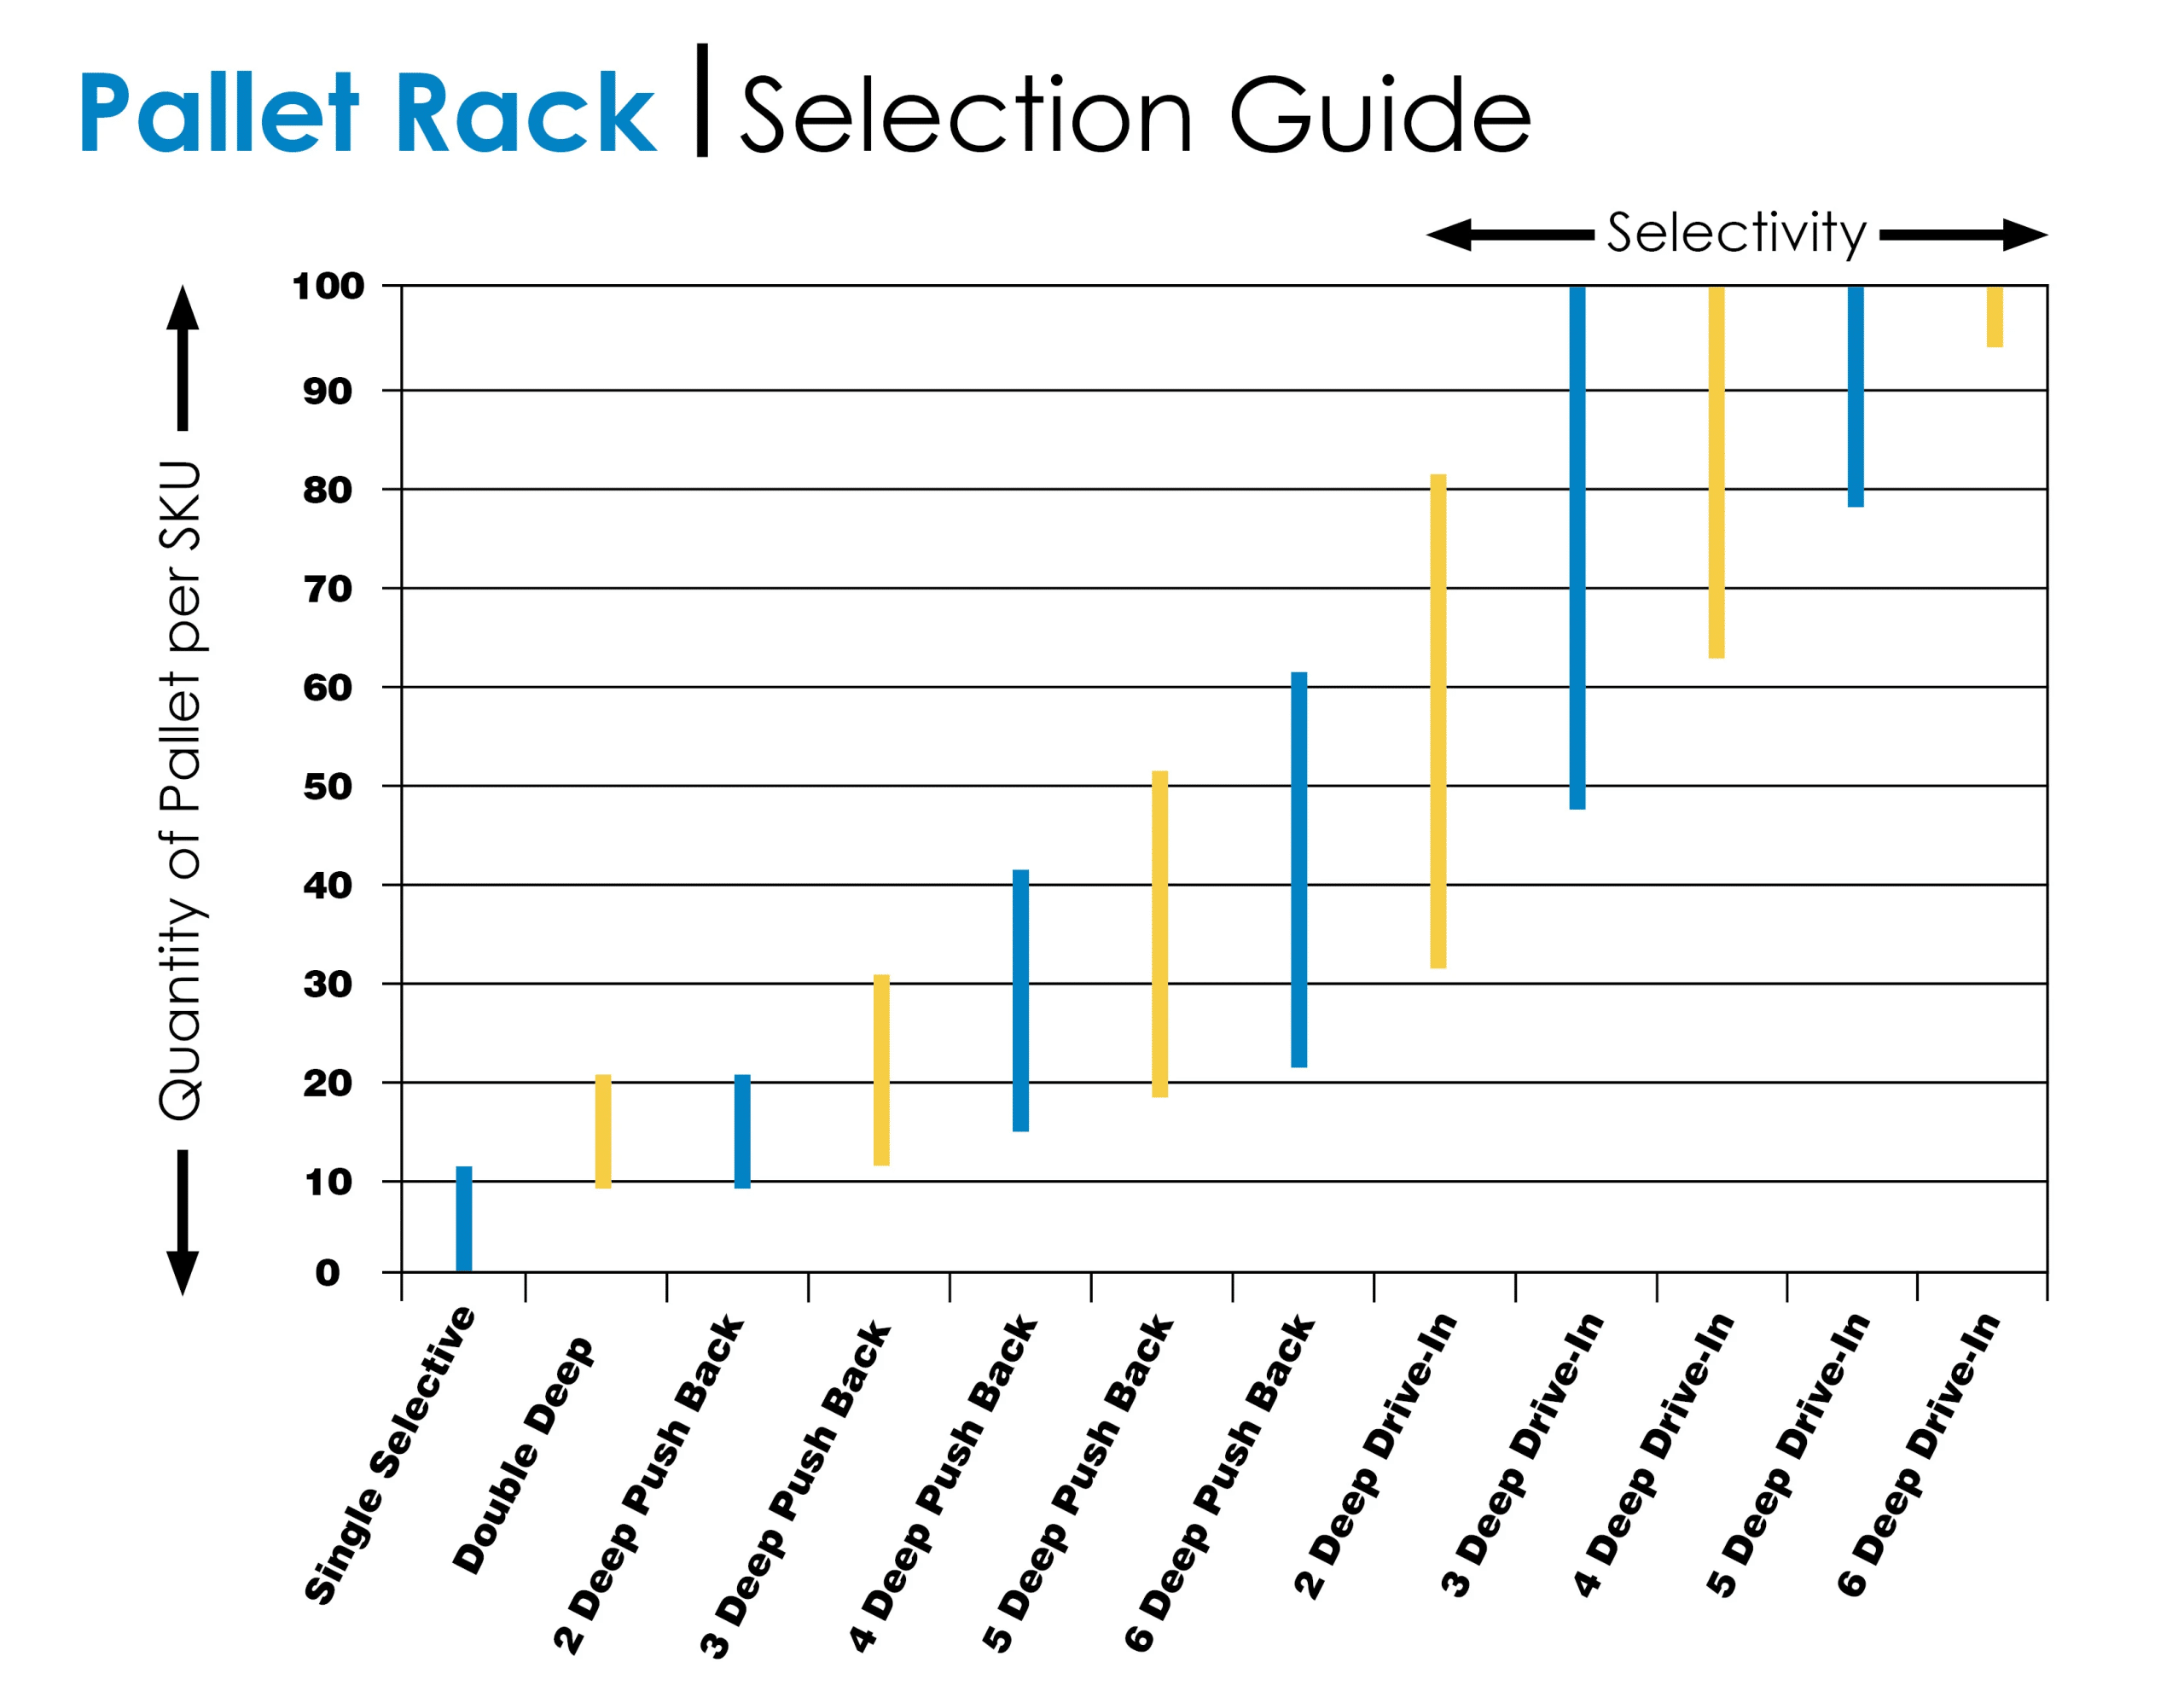 Pallet rack selection guide